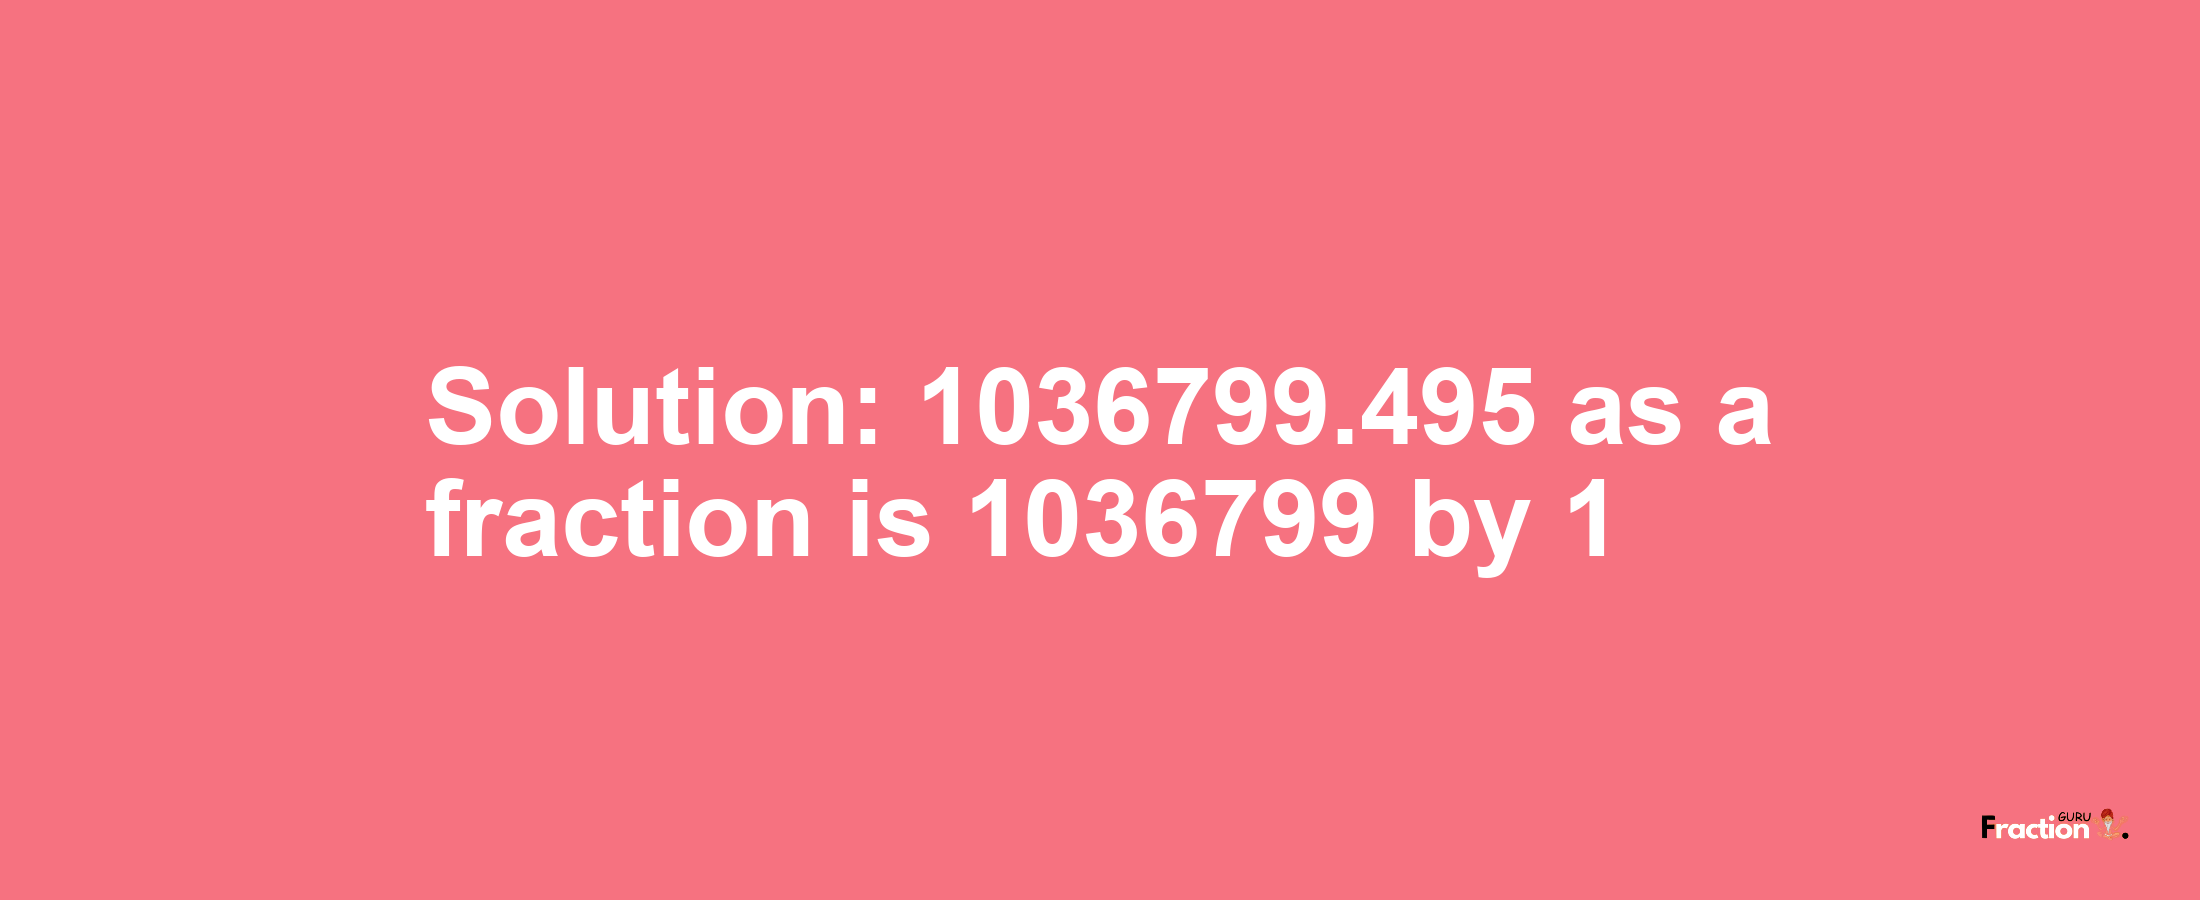 Solution:1036799.495 as a fraction is 1036799/1